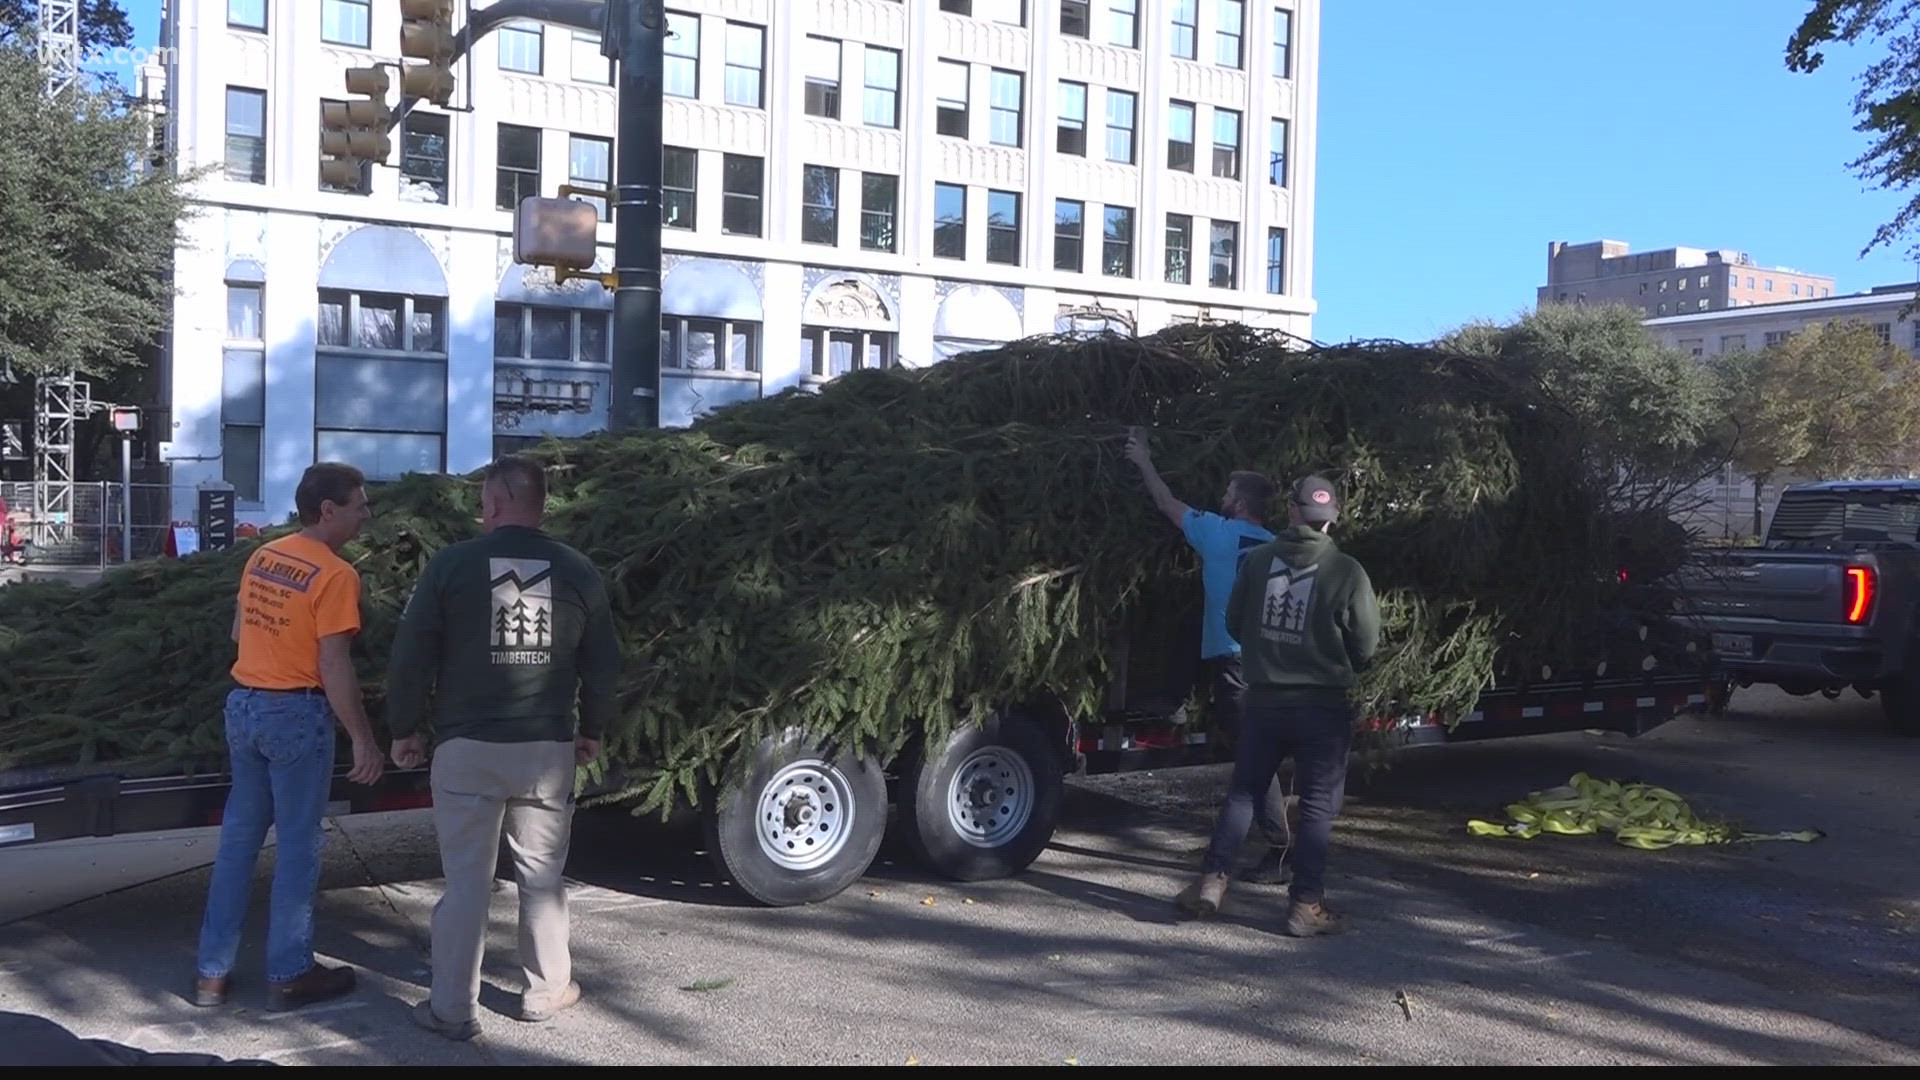 The Christmas tree arrives at the South Carolina State House